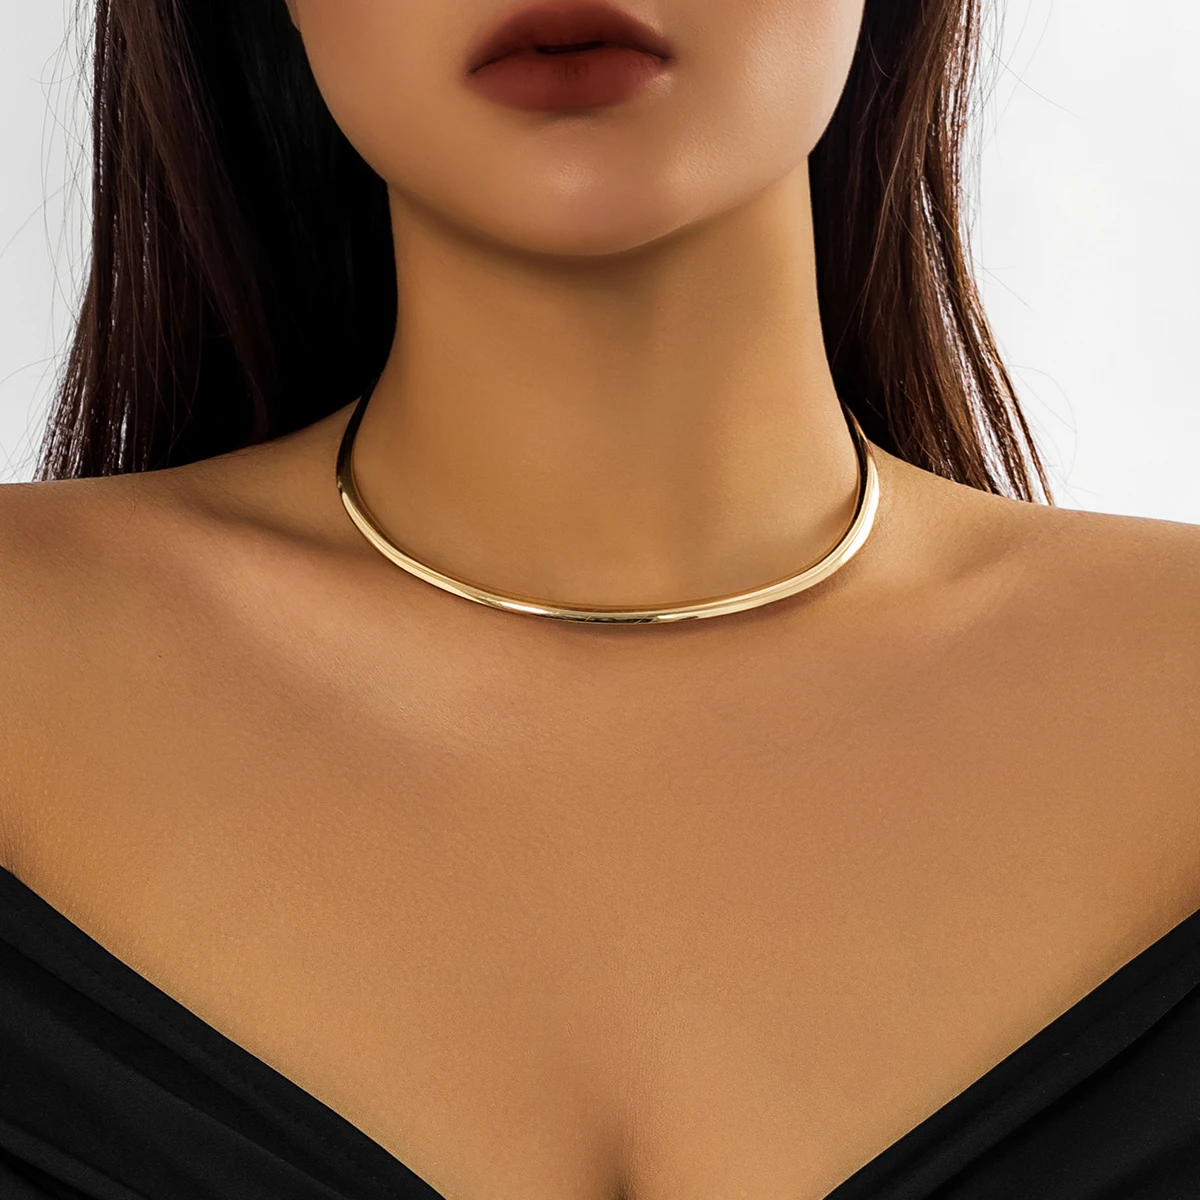 

Lacteo Simple Gold Color Metal Iron Chain Necklace Collar for Women Ladies Jewelry On The Neck Choker Torques Wedding Party New